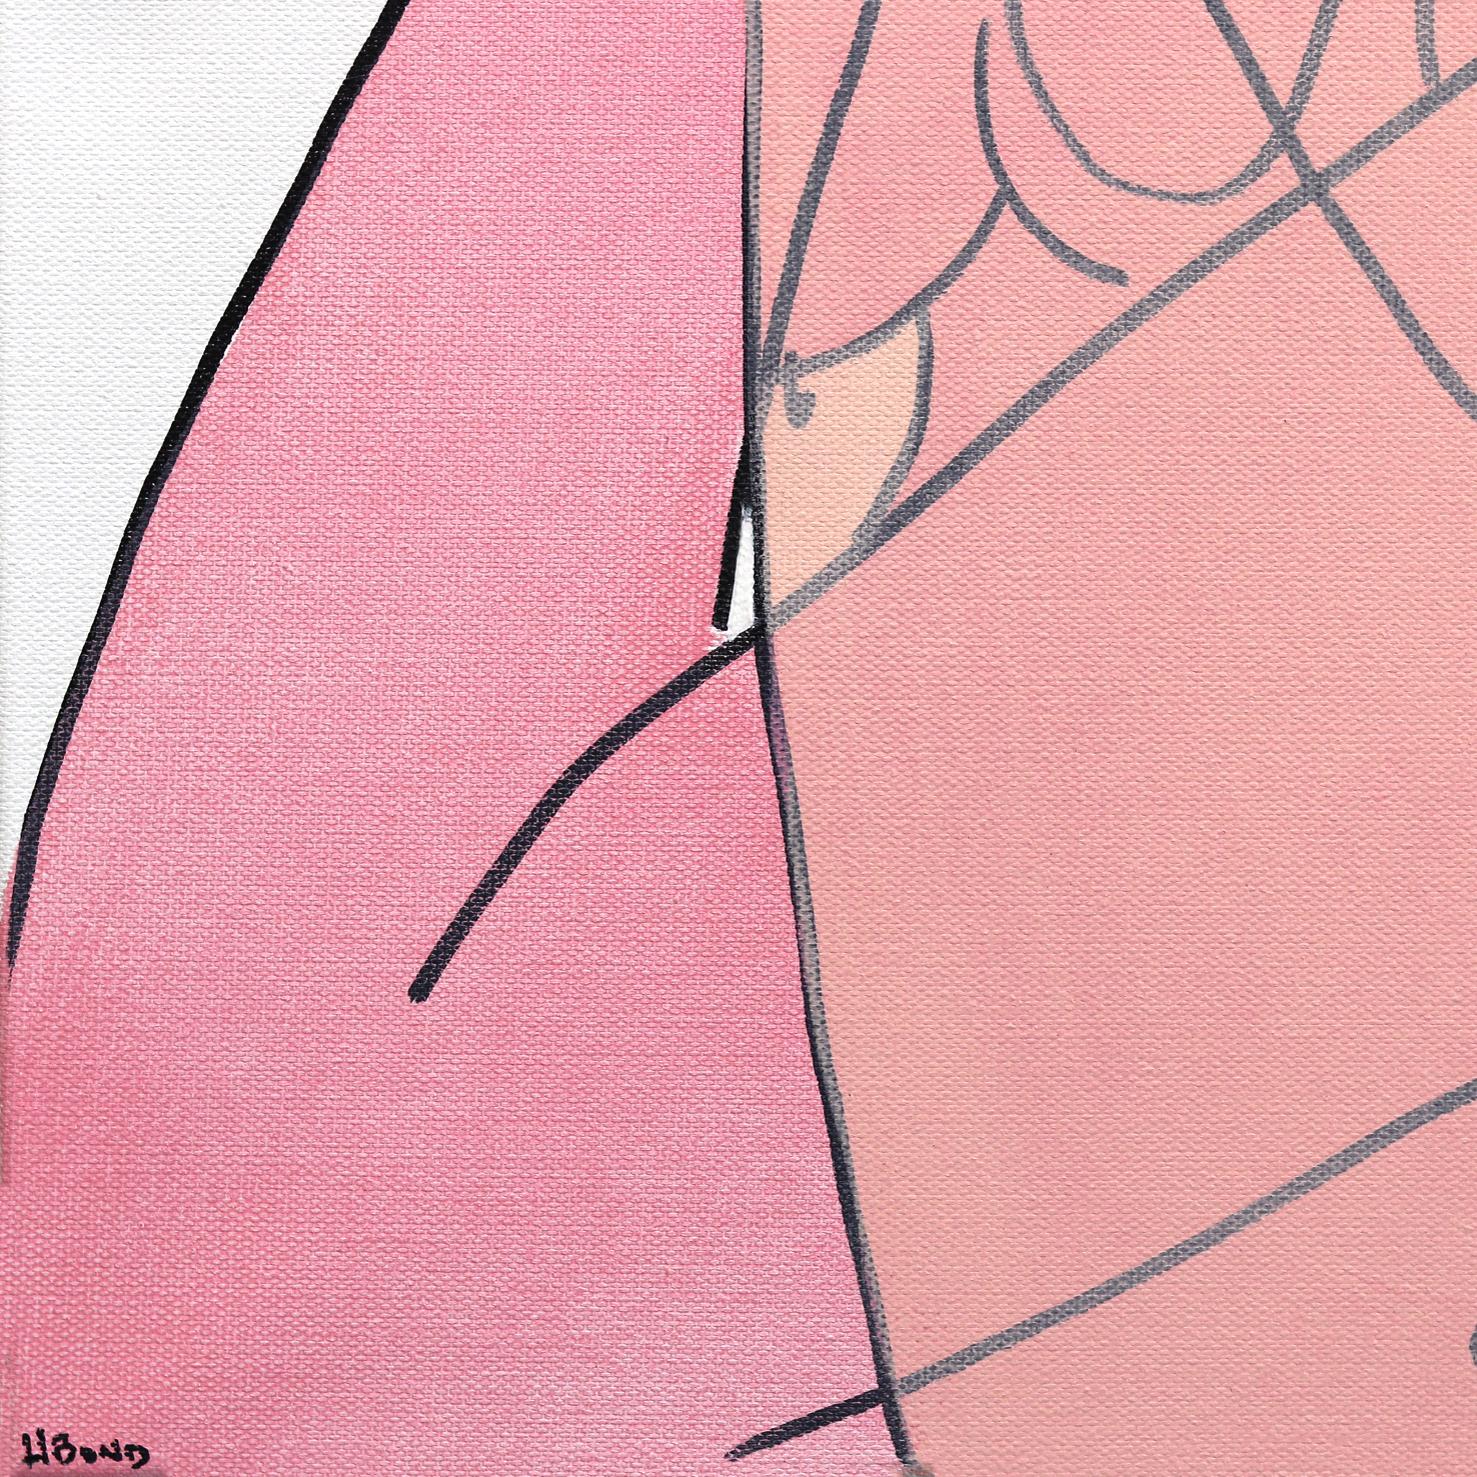 Untitled (Pinks XII) - Figurative Portrait Woman Pop Art Painting For Sale 3